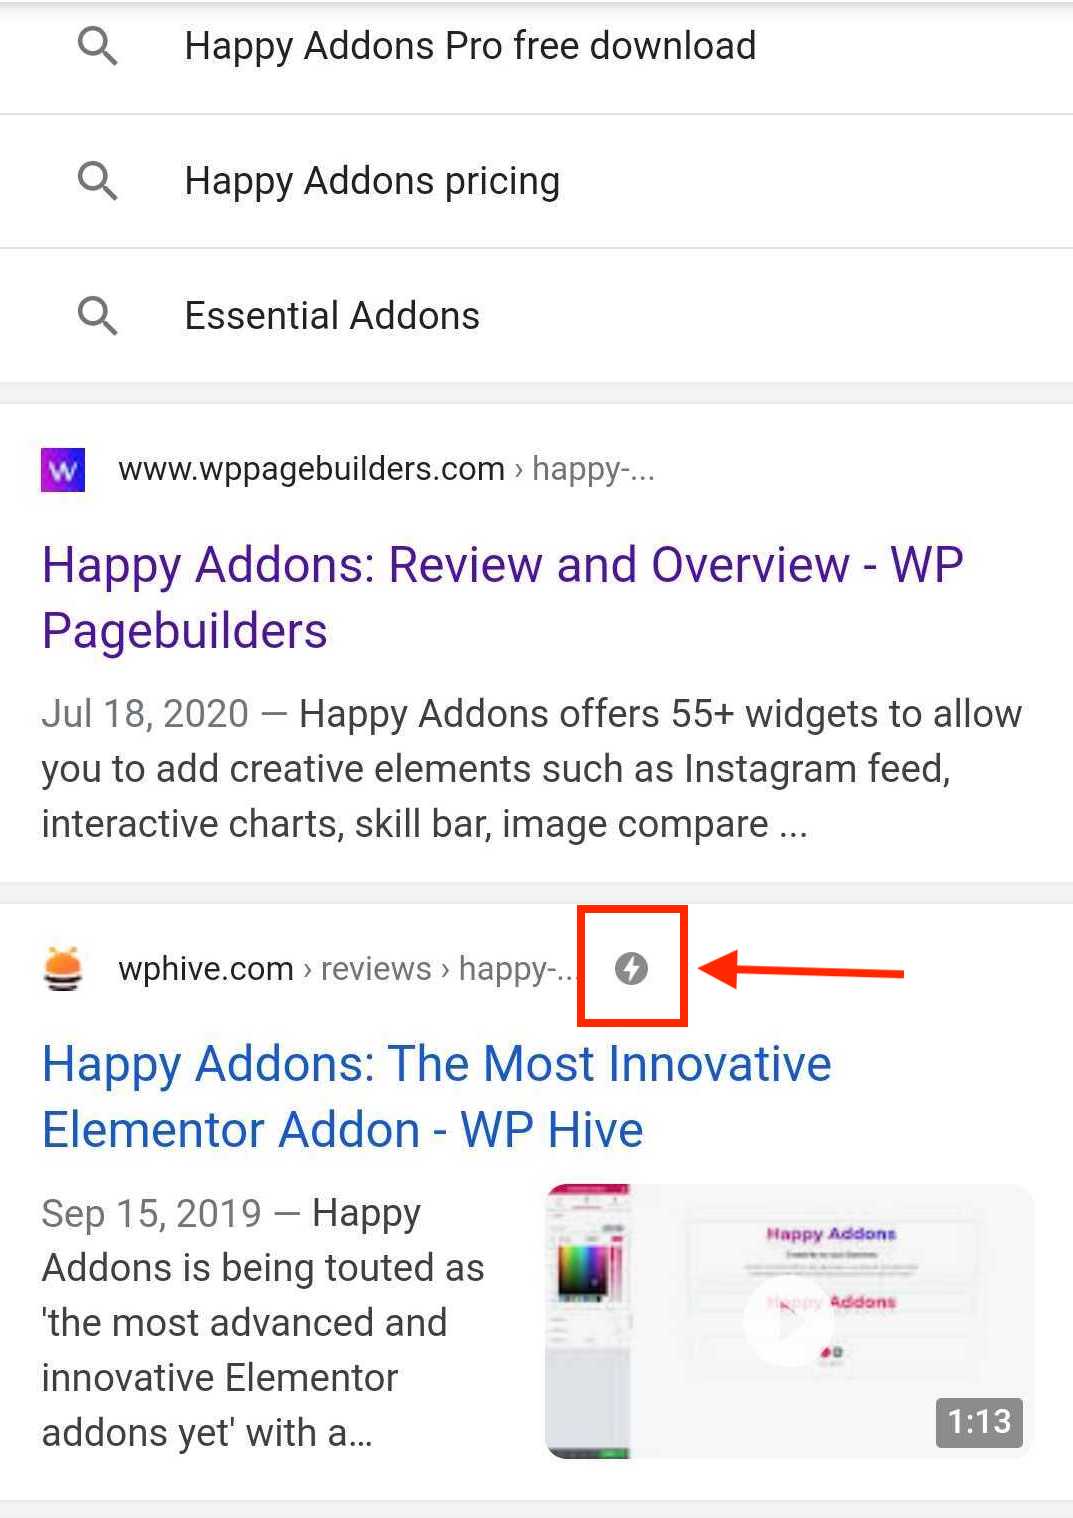 amp sign in search results